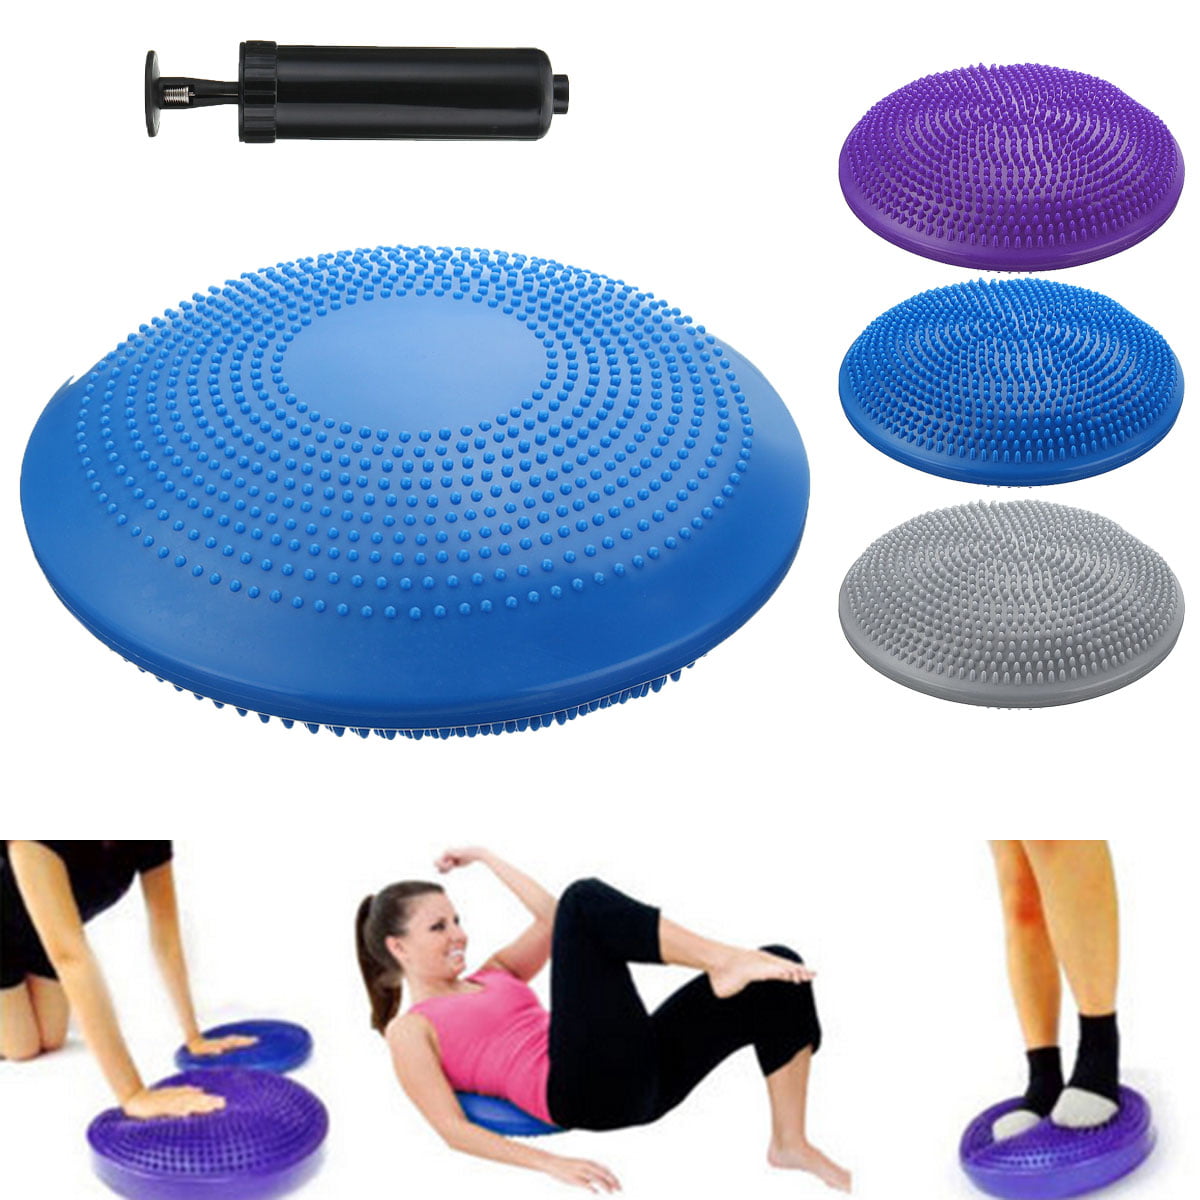 Rehab Gym and Core 13 Grey Stability Durable Exercise Balance Pad to Improve Coordination Balancing Disc Cushions for Home School Inflatable Wobble Cushion with Pump by Day 1 Fitness